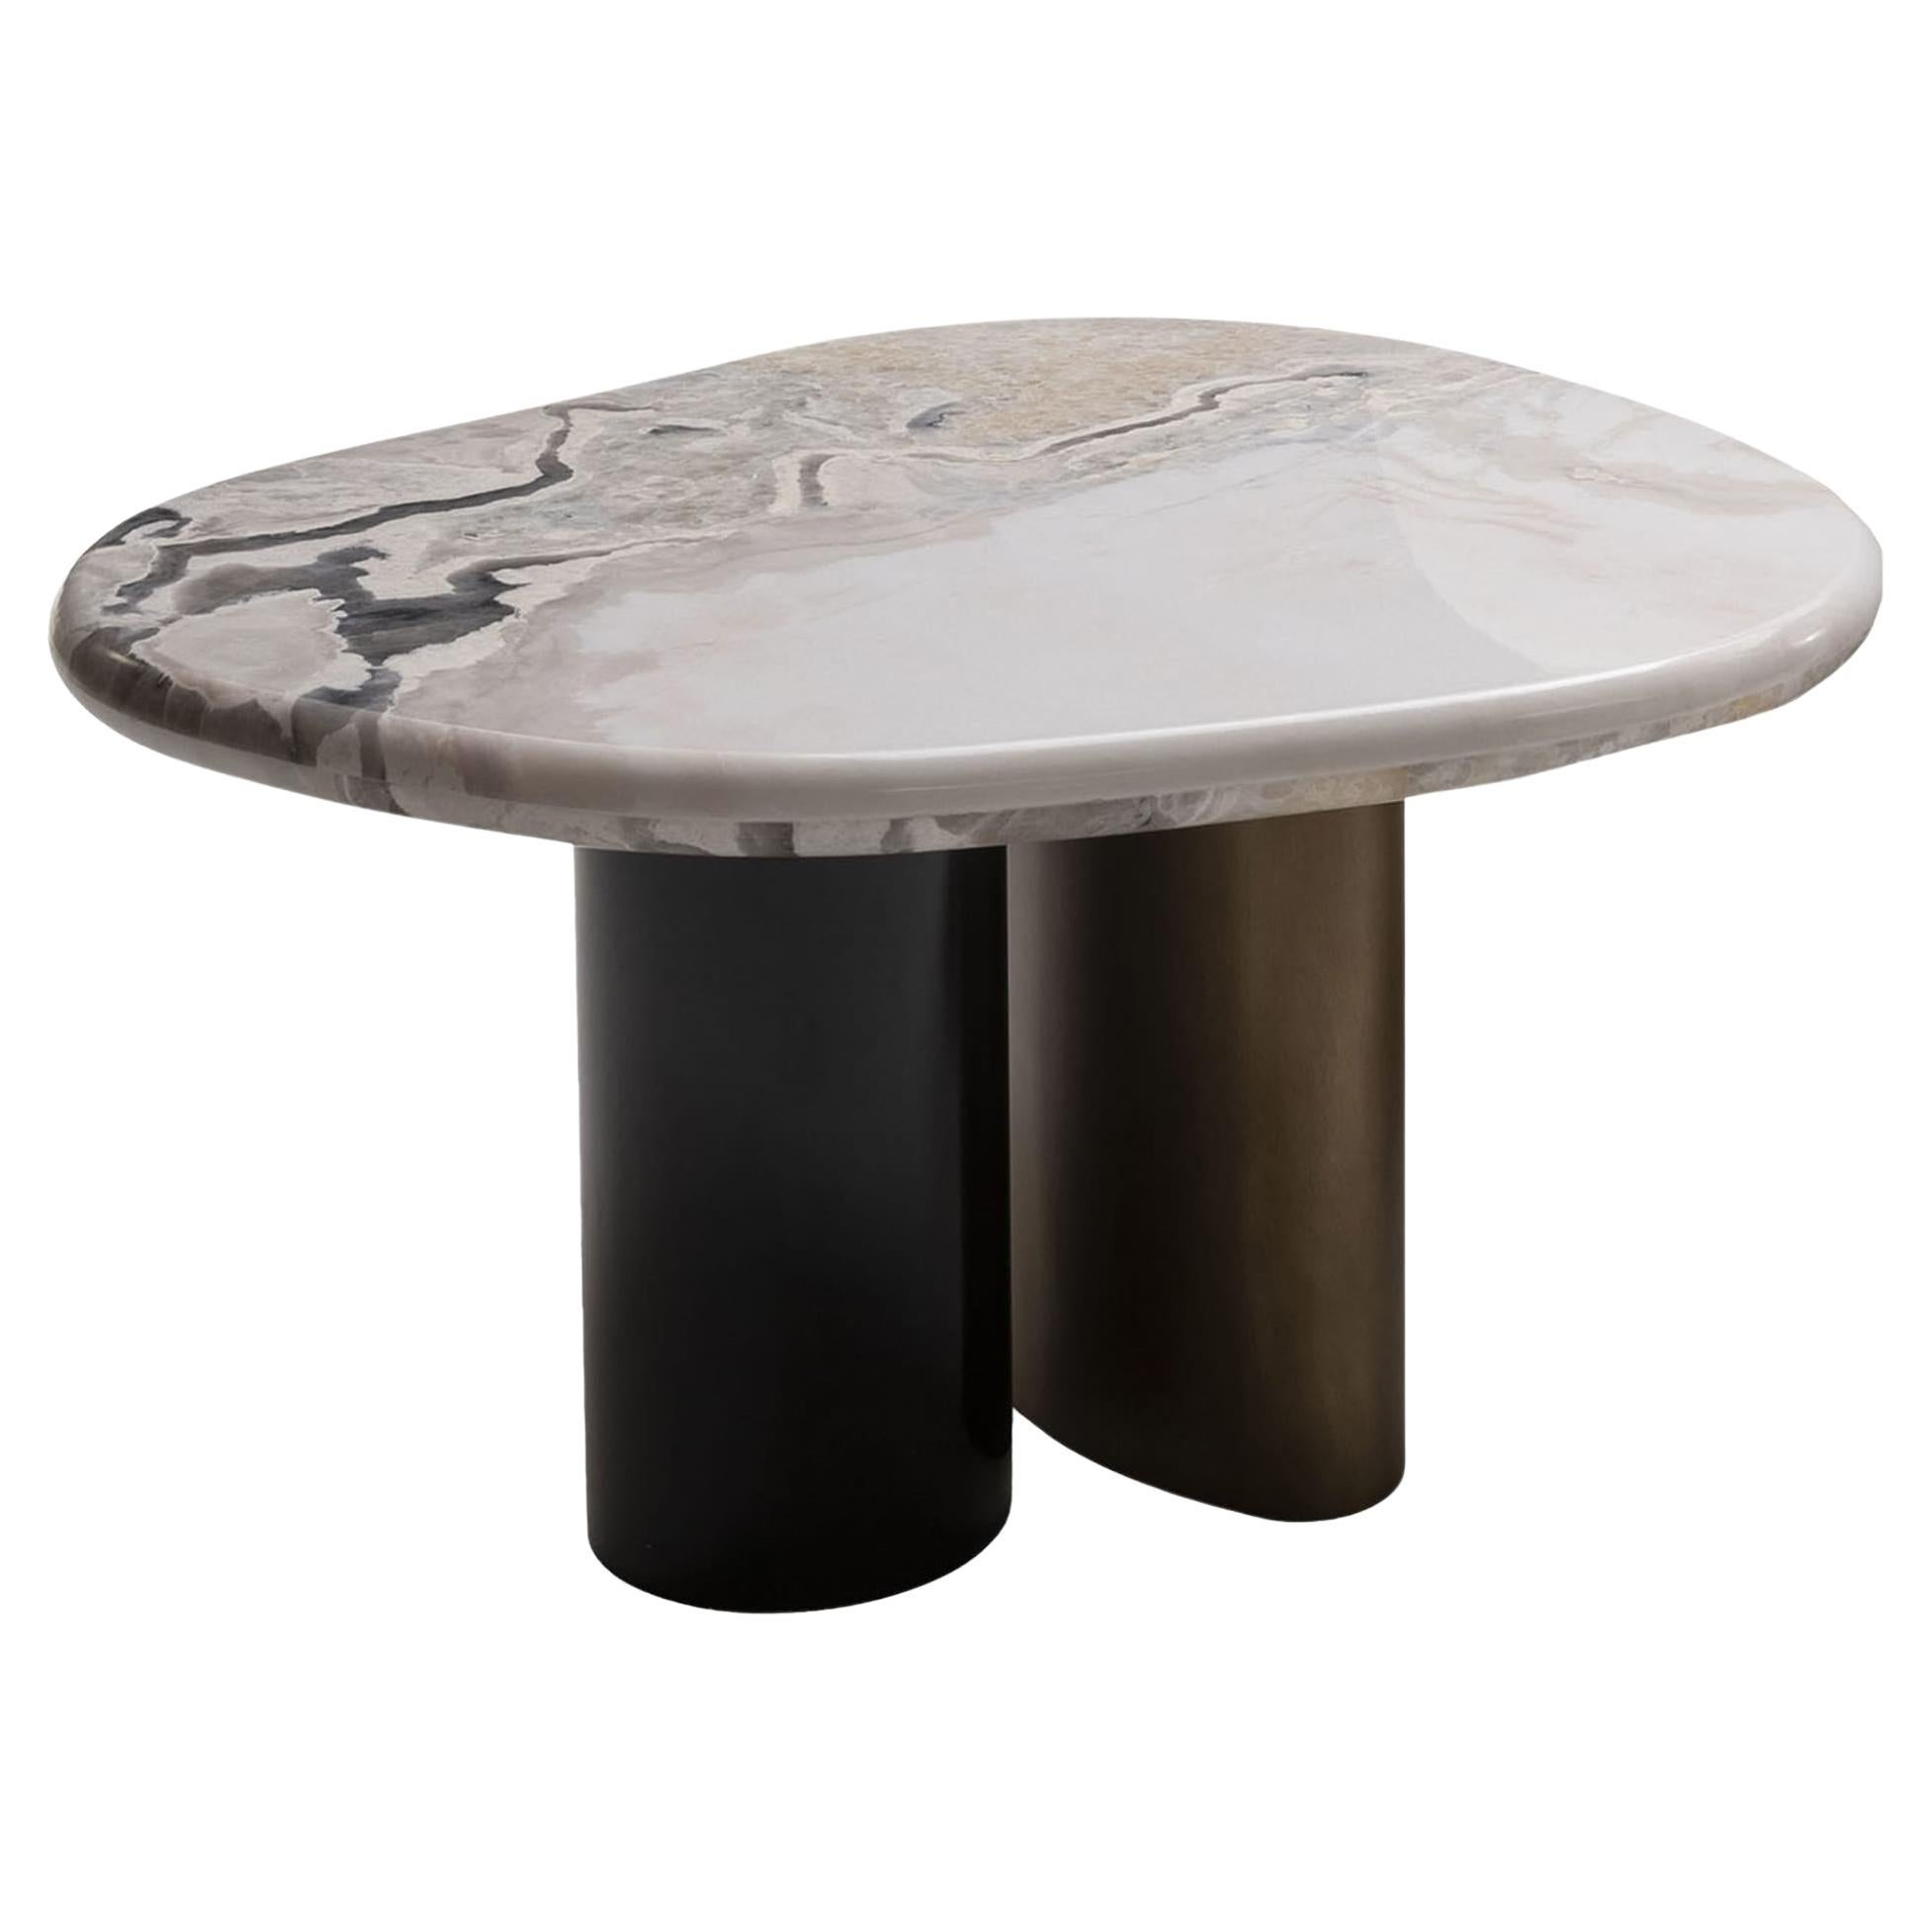 ED/50 412 Cloud Tall Coffee Table For Sale